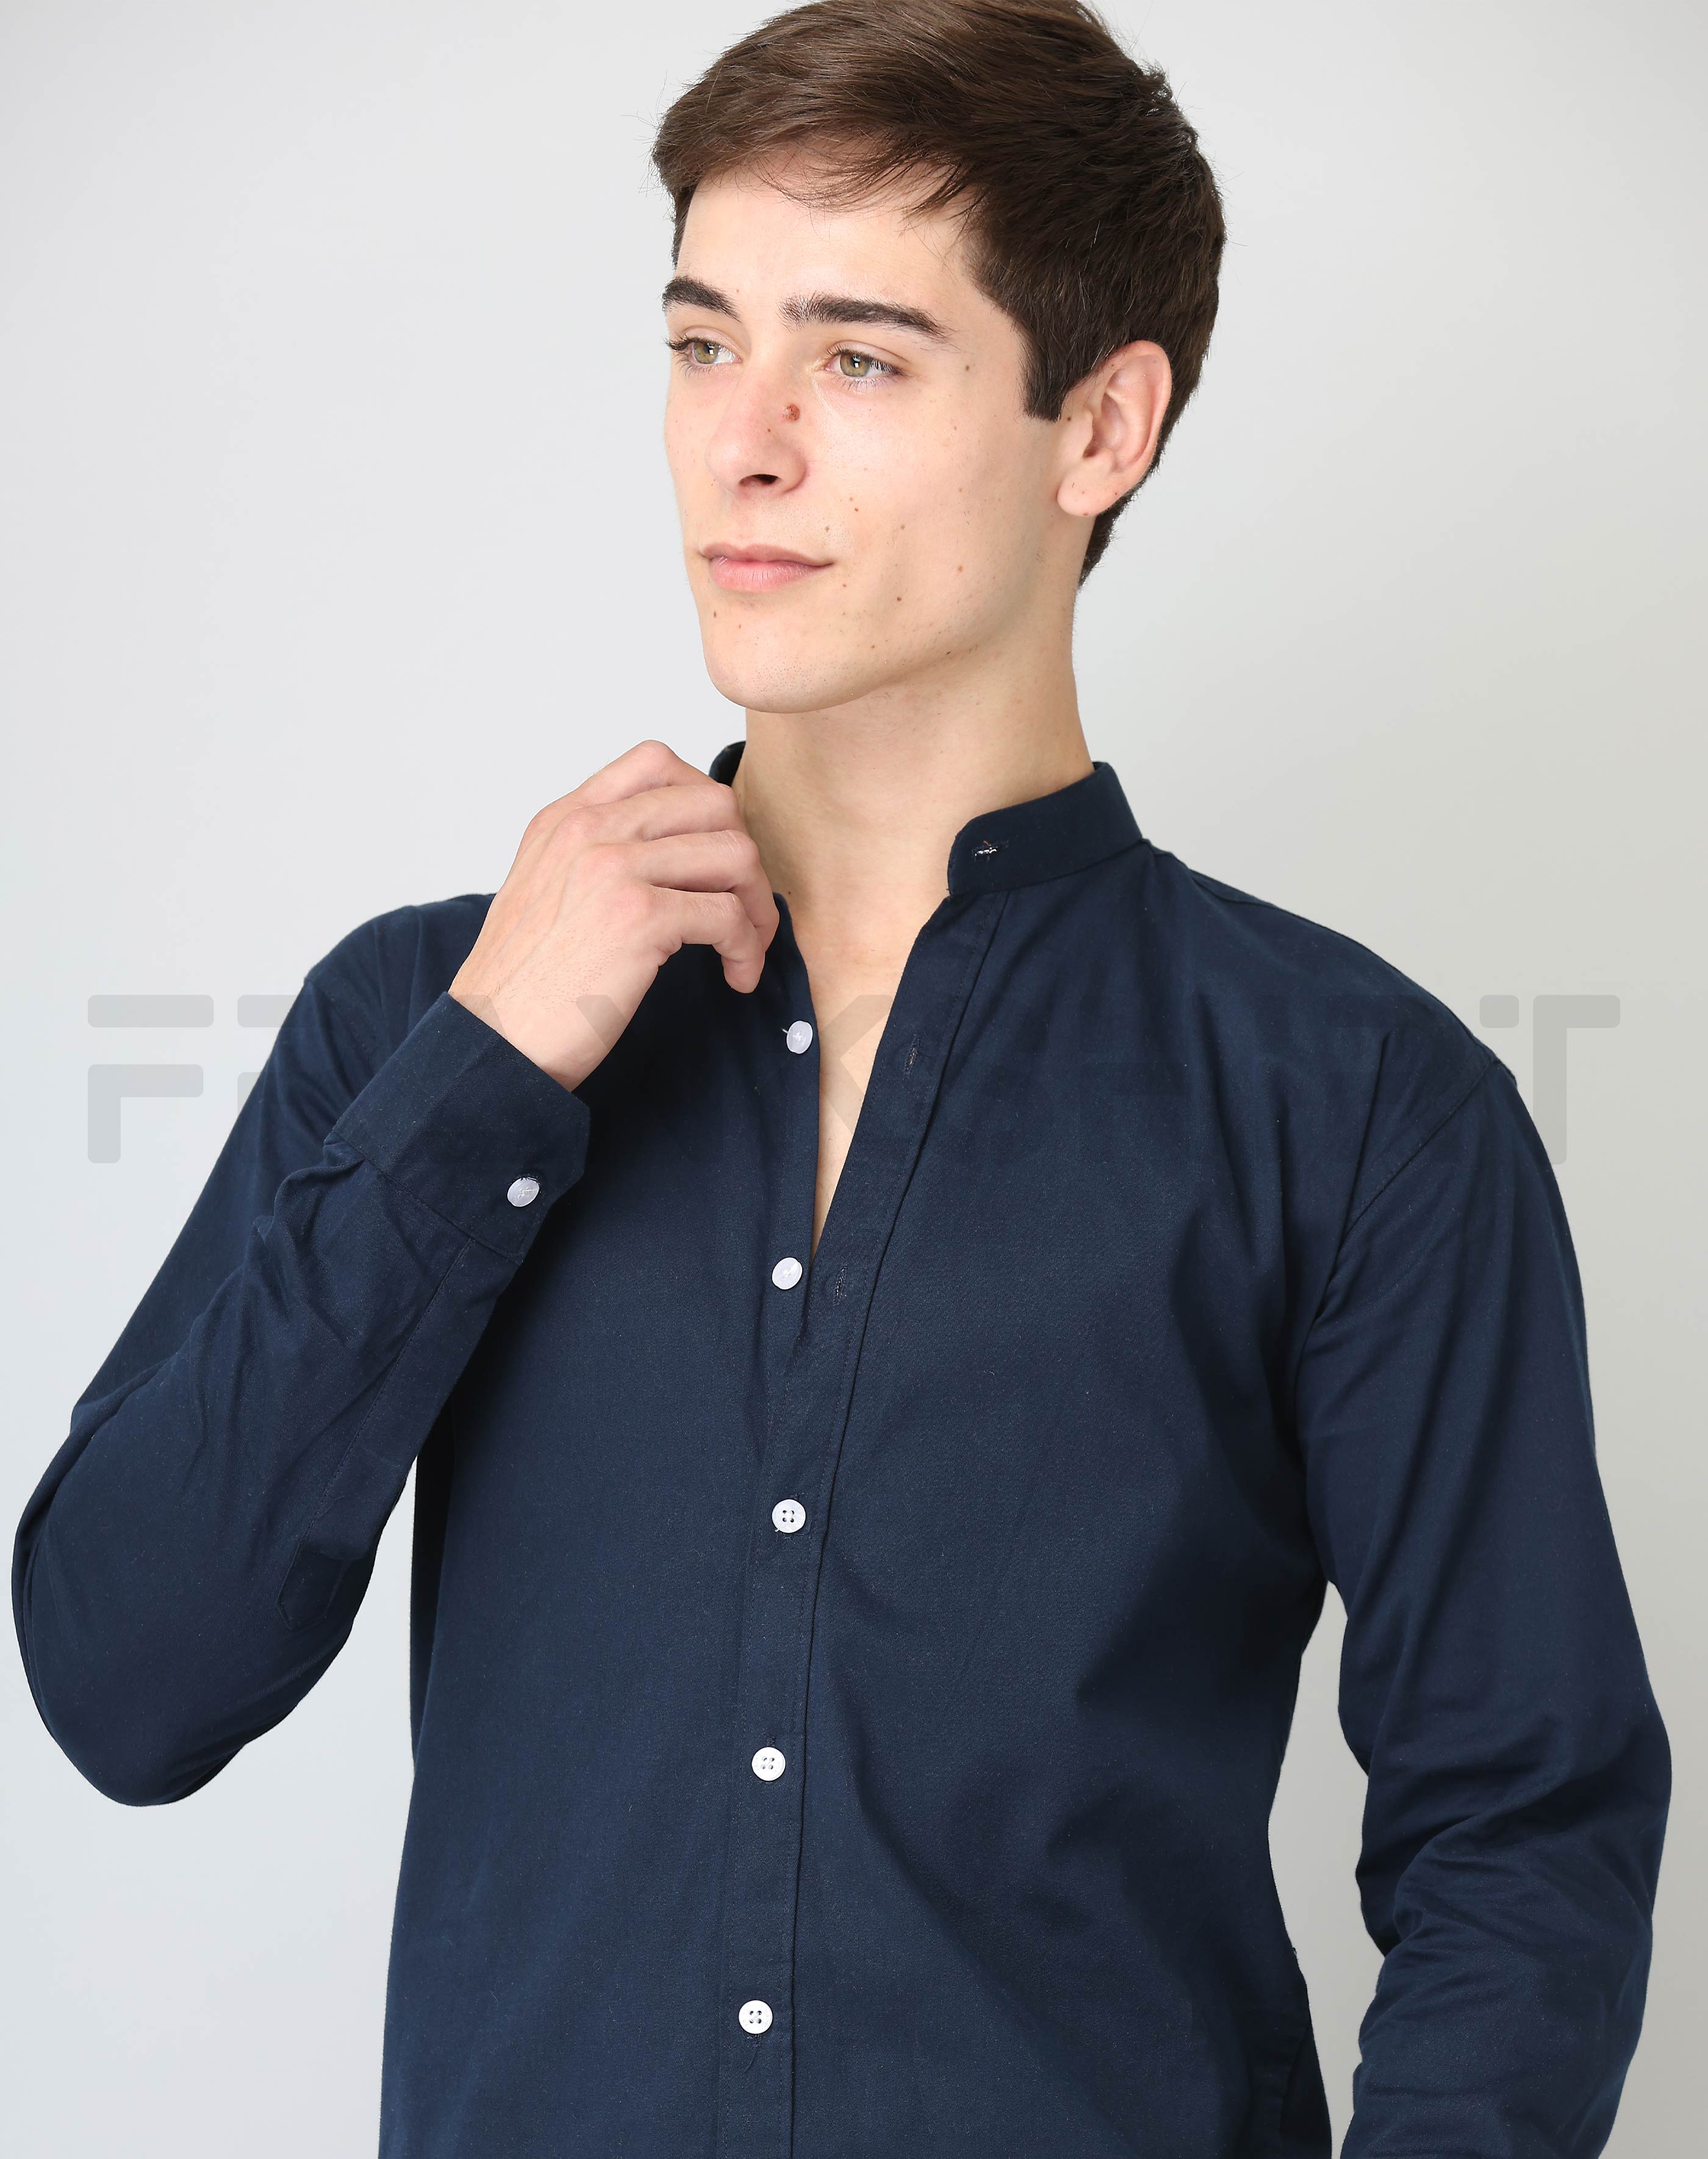 Frankshirt Chinese Collar Navy Blue Solid Tailored Fit Cotton Casual Shirt for Man